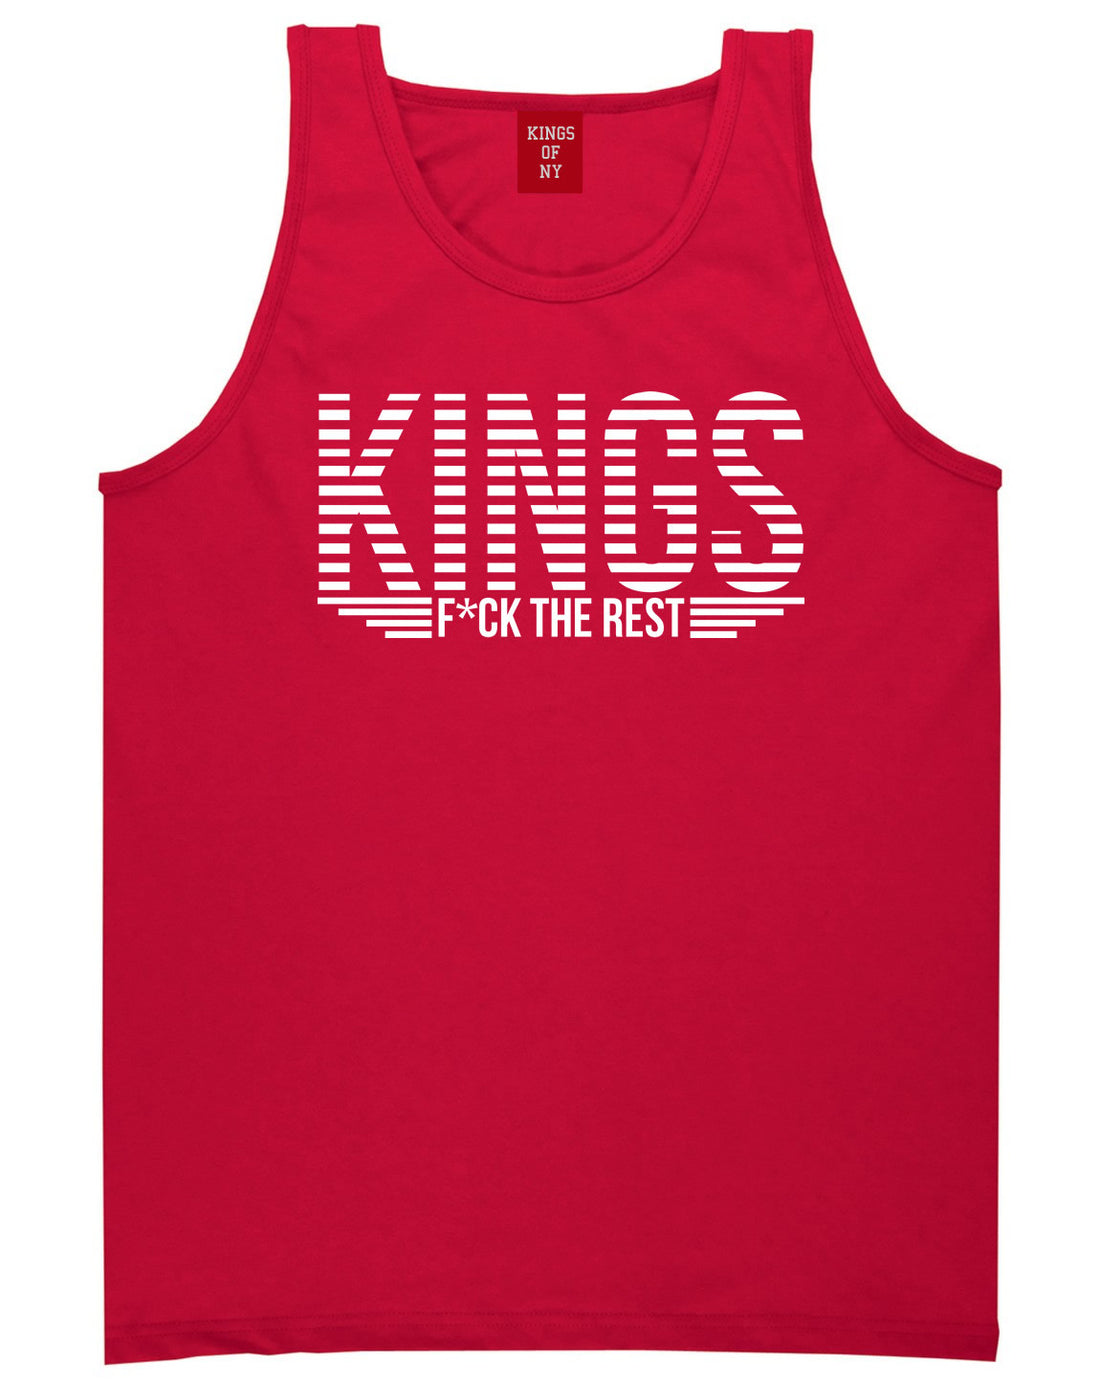 Kings Of NY New York Logo F the Rest Tank Top in Red